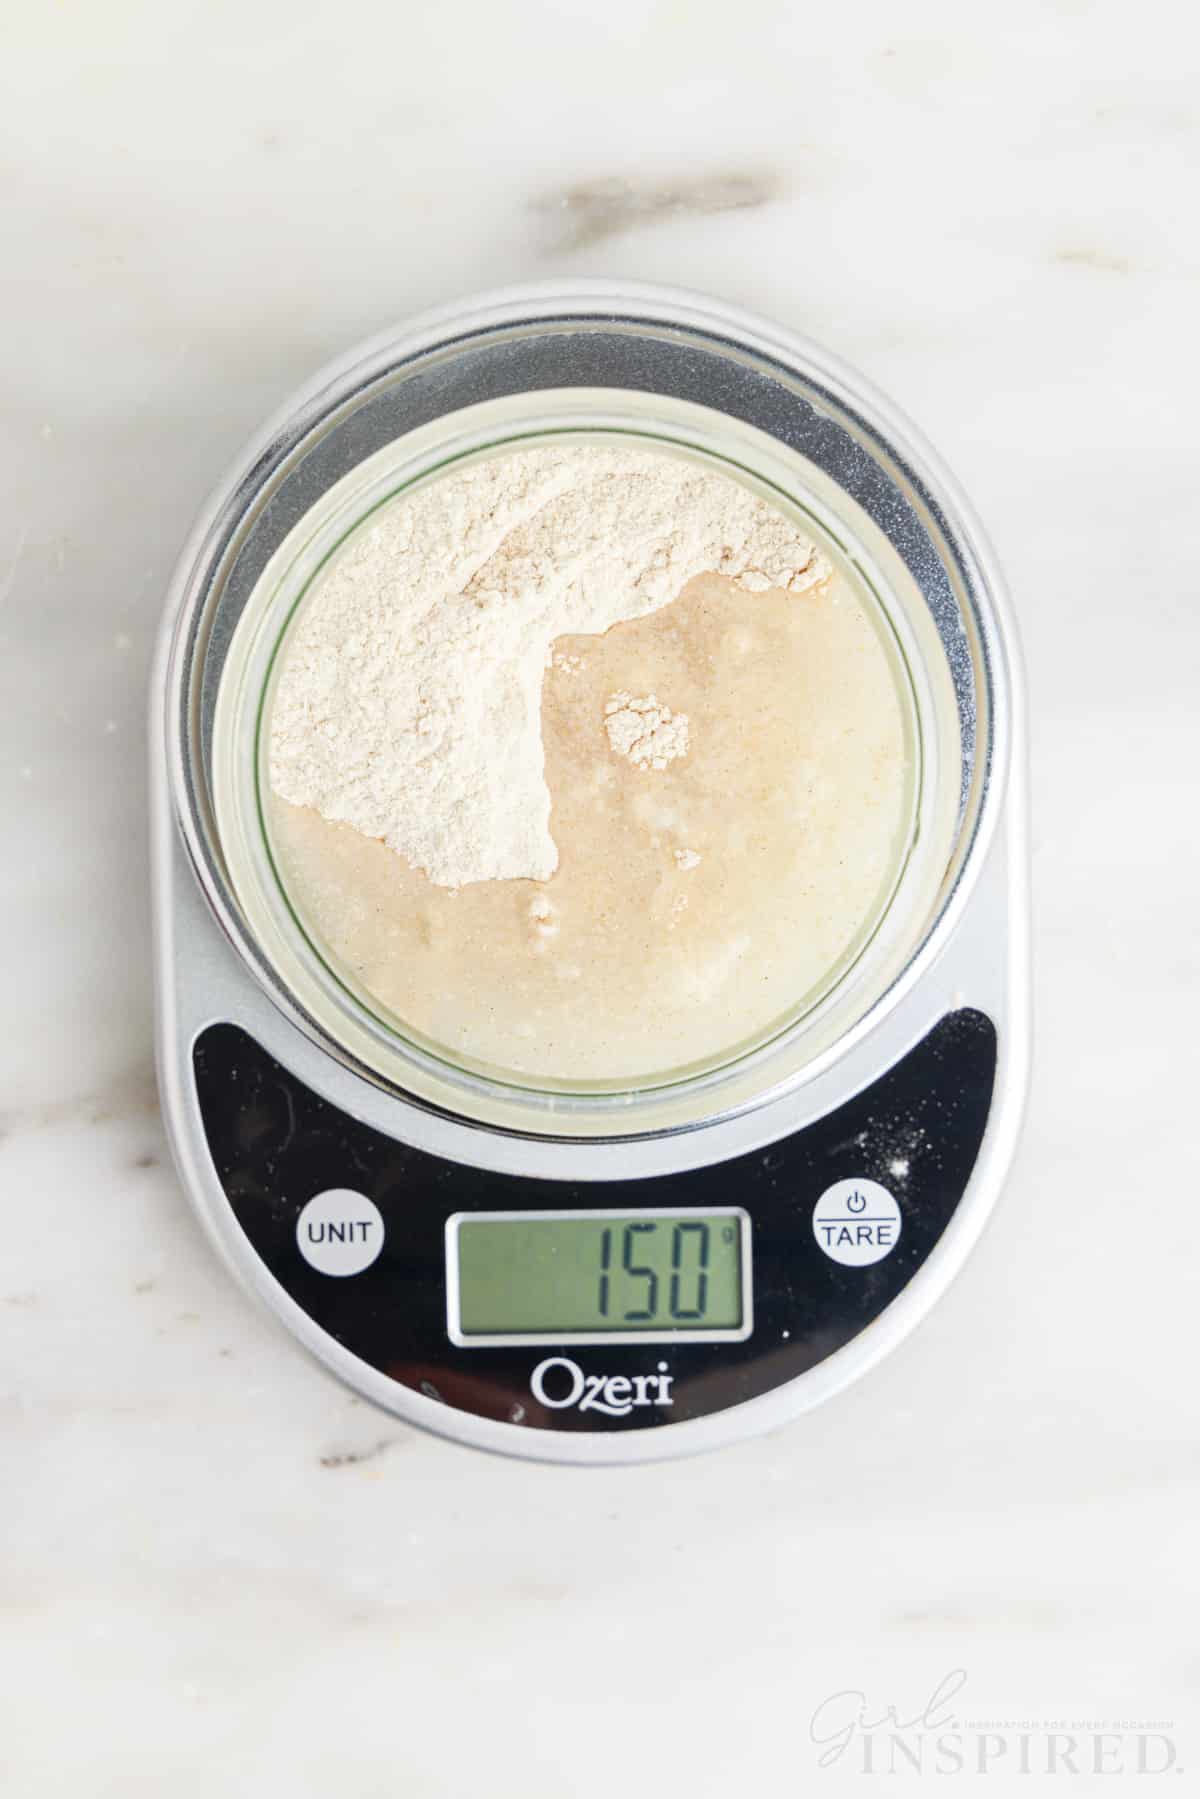 water, flour, and sourdough starter in glass jar on a food scale reading 150 grams.